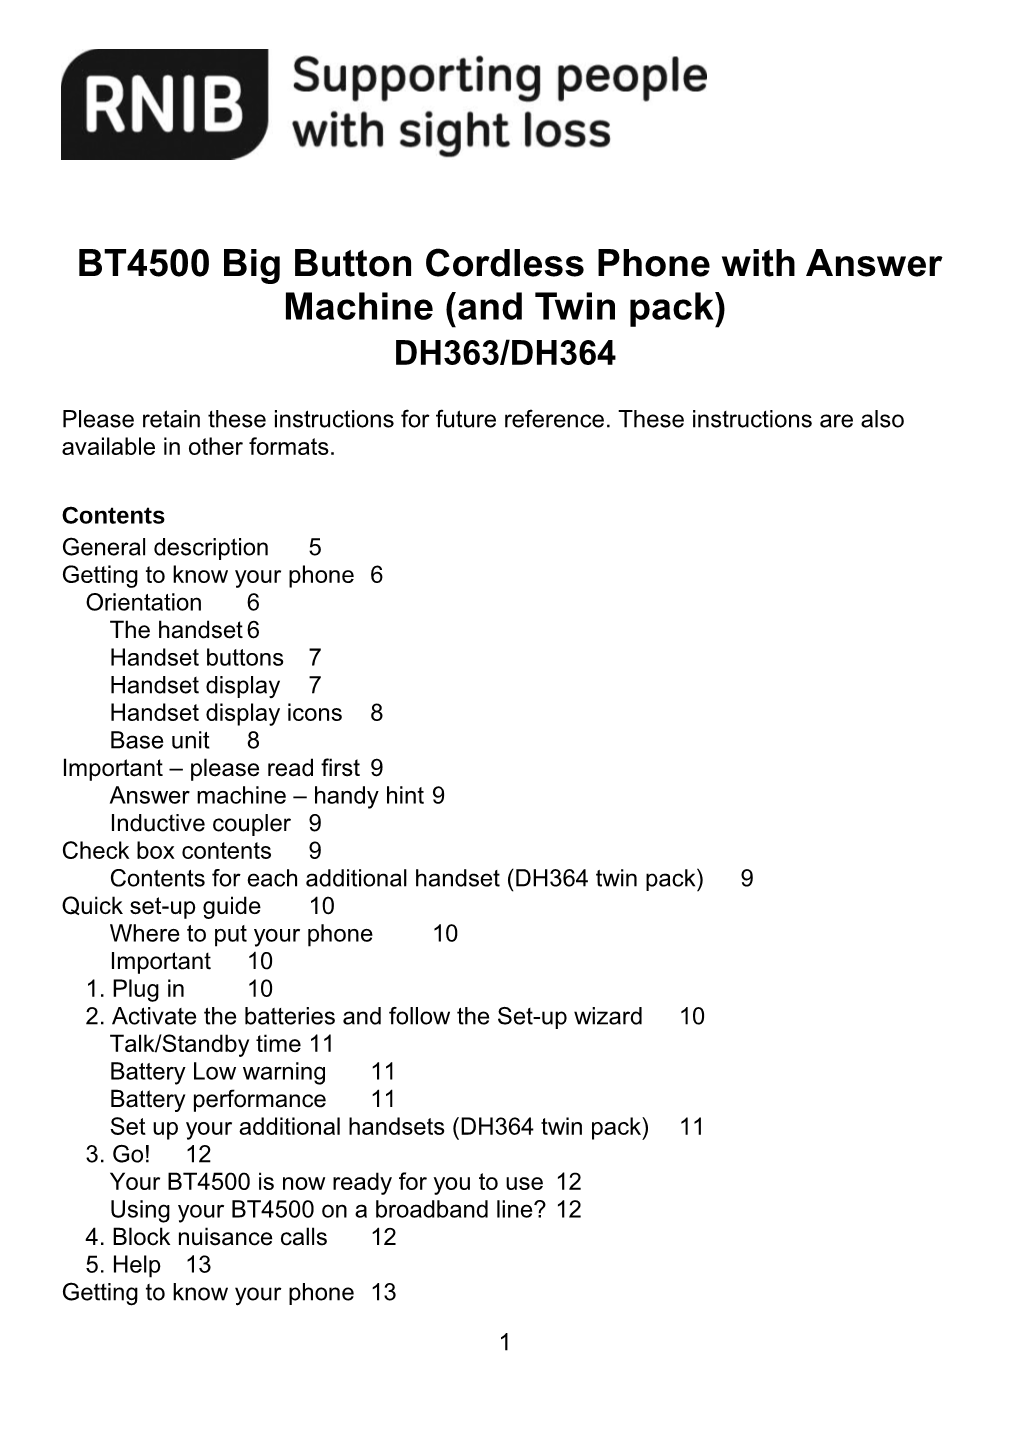 BT4500 Big Button Cordless Phone with Answer Machine (And Twin Pack)